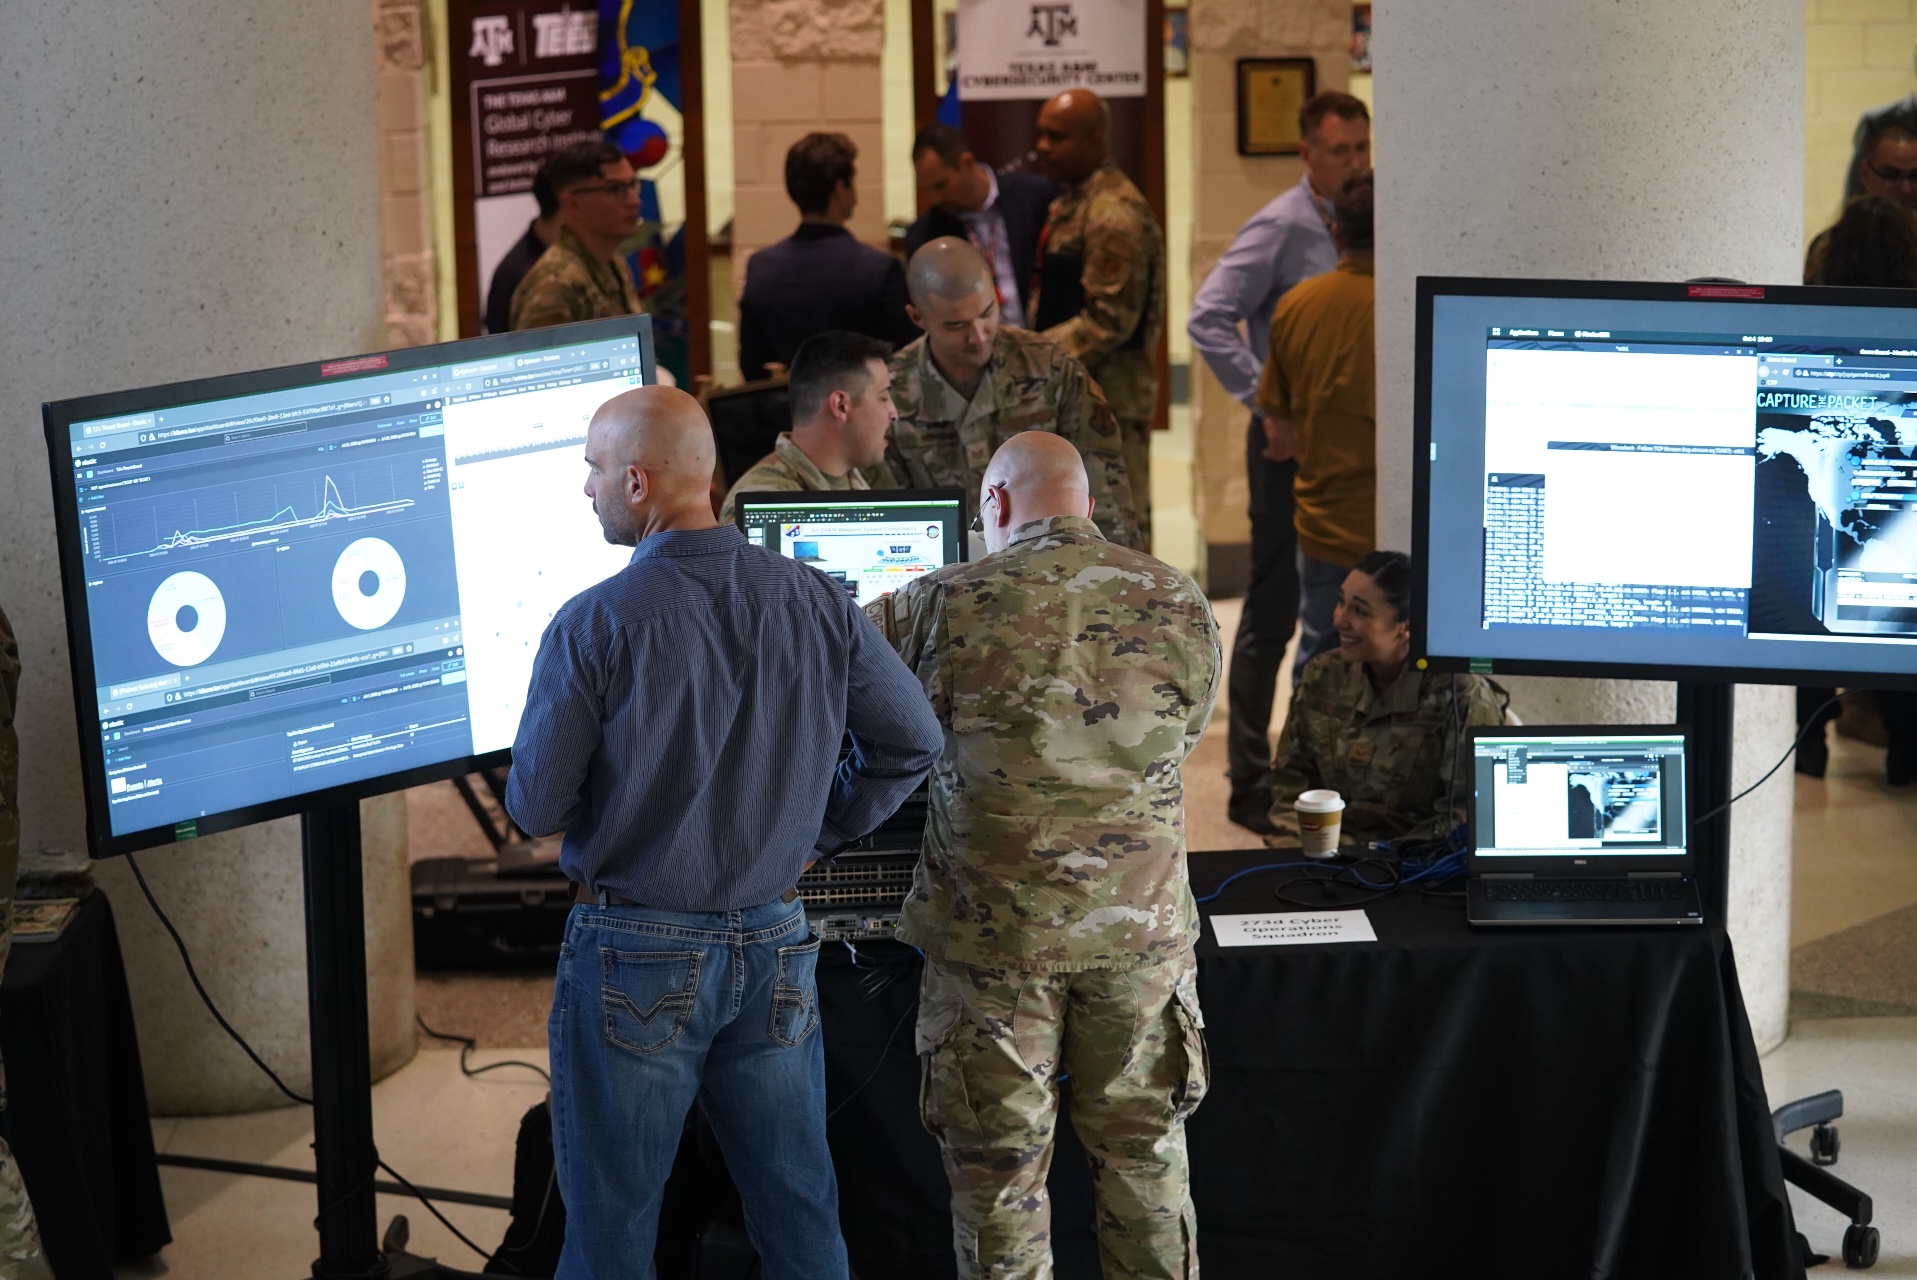 The Texas Military Department hosted Cyber Aware 2022. Cyber Aware is an annual event hosted by the TMD and designed to promote state and federal cybersecurity innovation and collaboration across the state. State and federal responders provided exhibits and demonstrations of the latest in cyber innovations such as drones, Star Link satellites, and command and control packages.